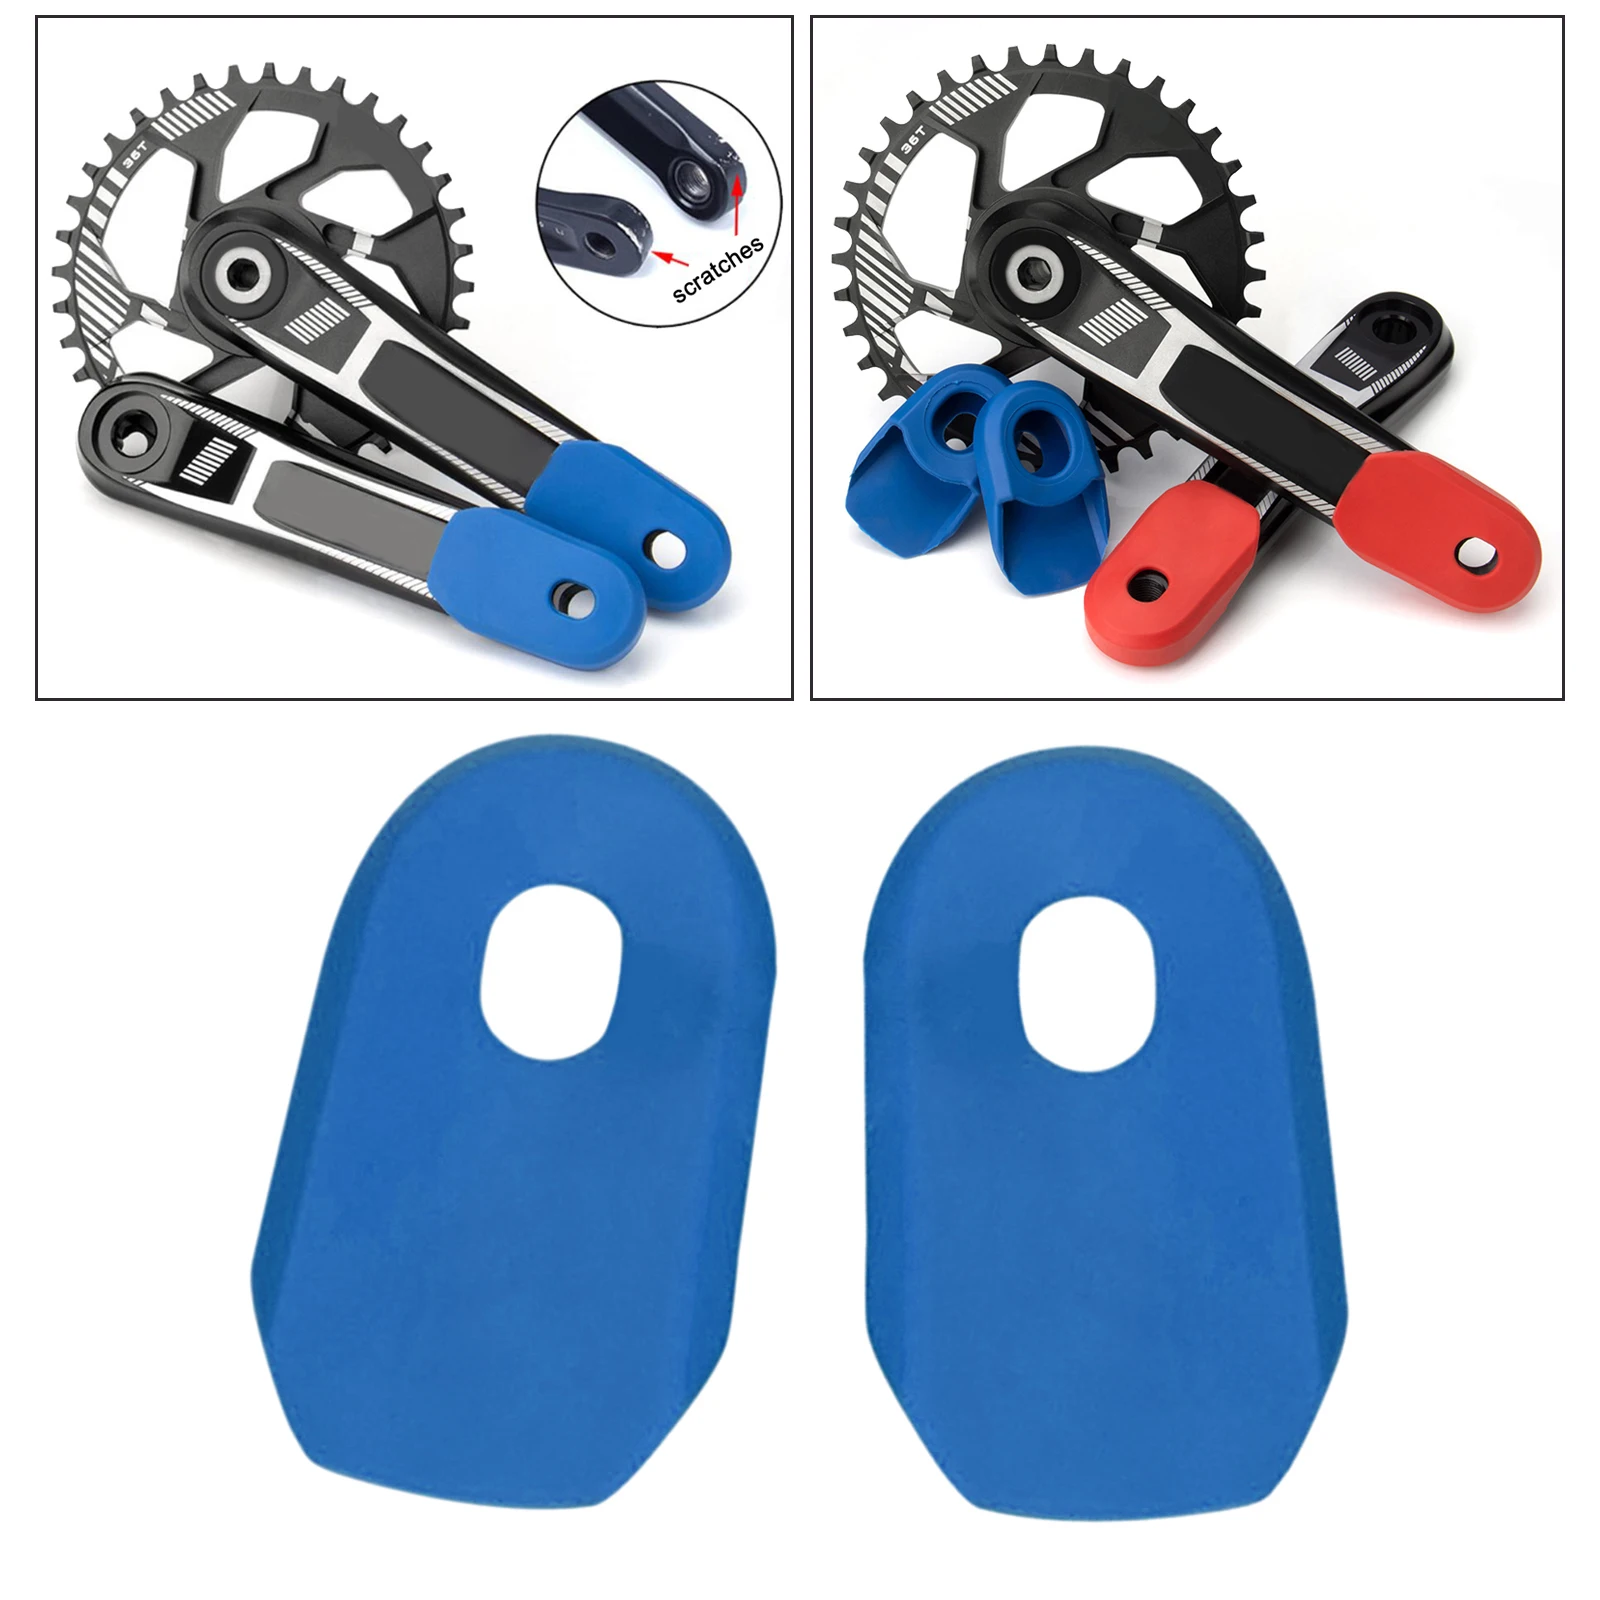 2x bicycle crank arm protector bicycle crank boots cover cycling